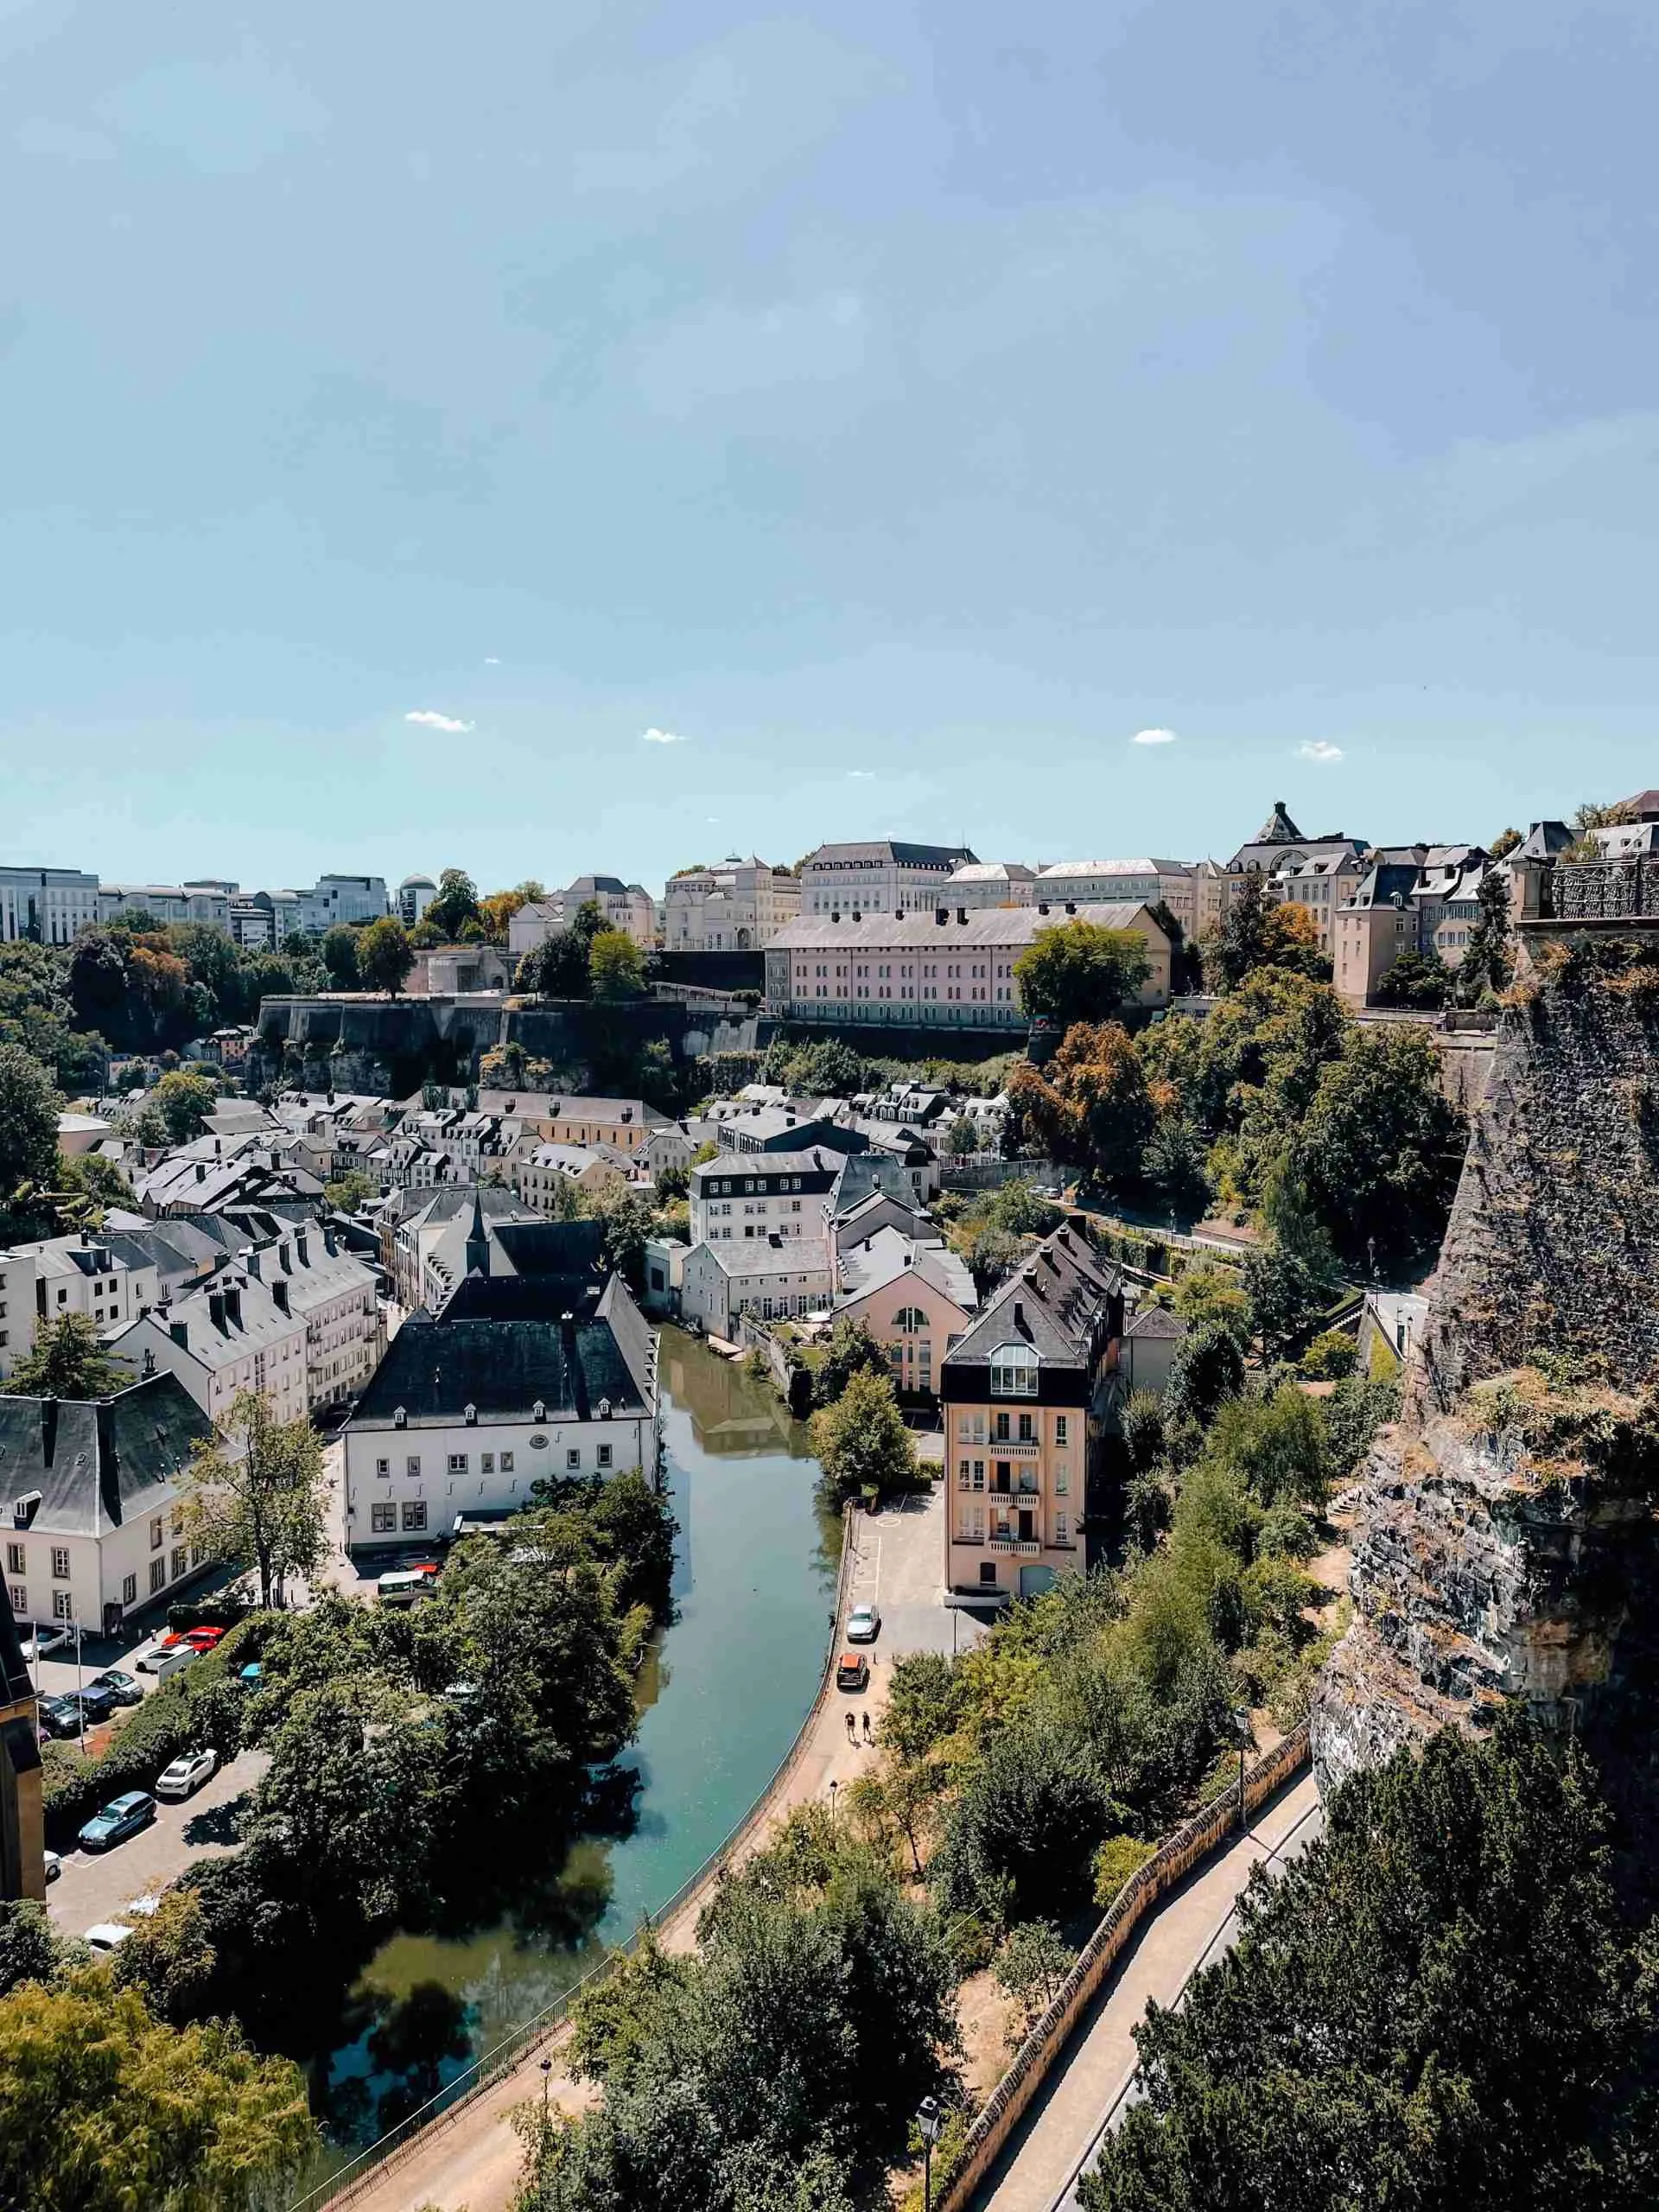 View overlooking the Lower City of Luxembourg from the Chemin de la Corniche